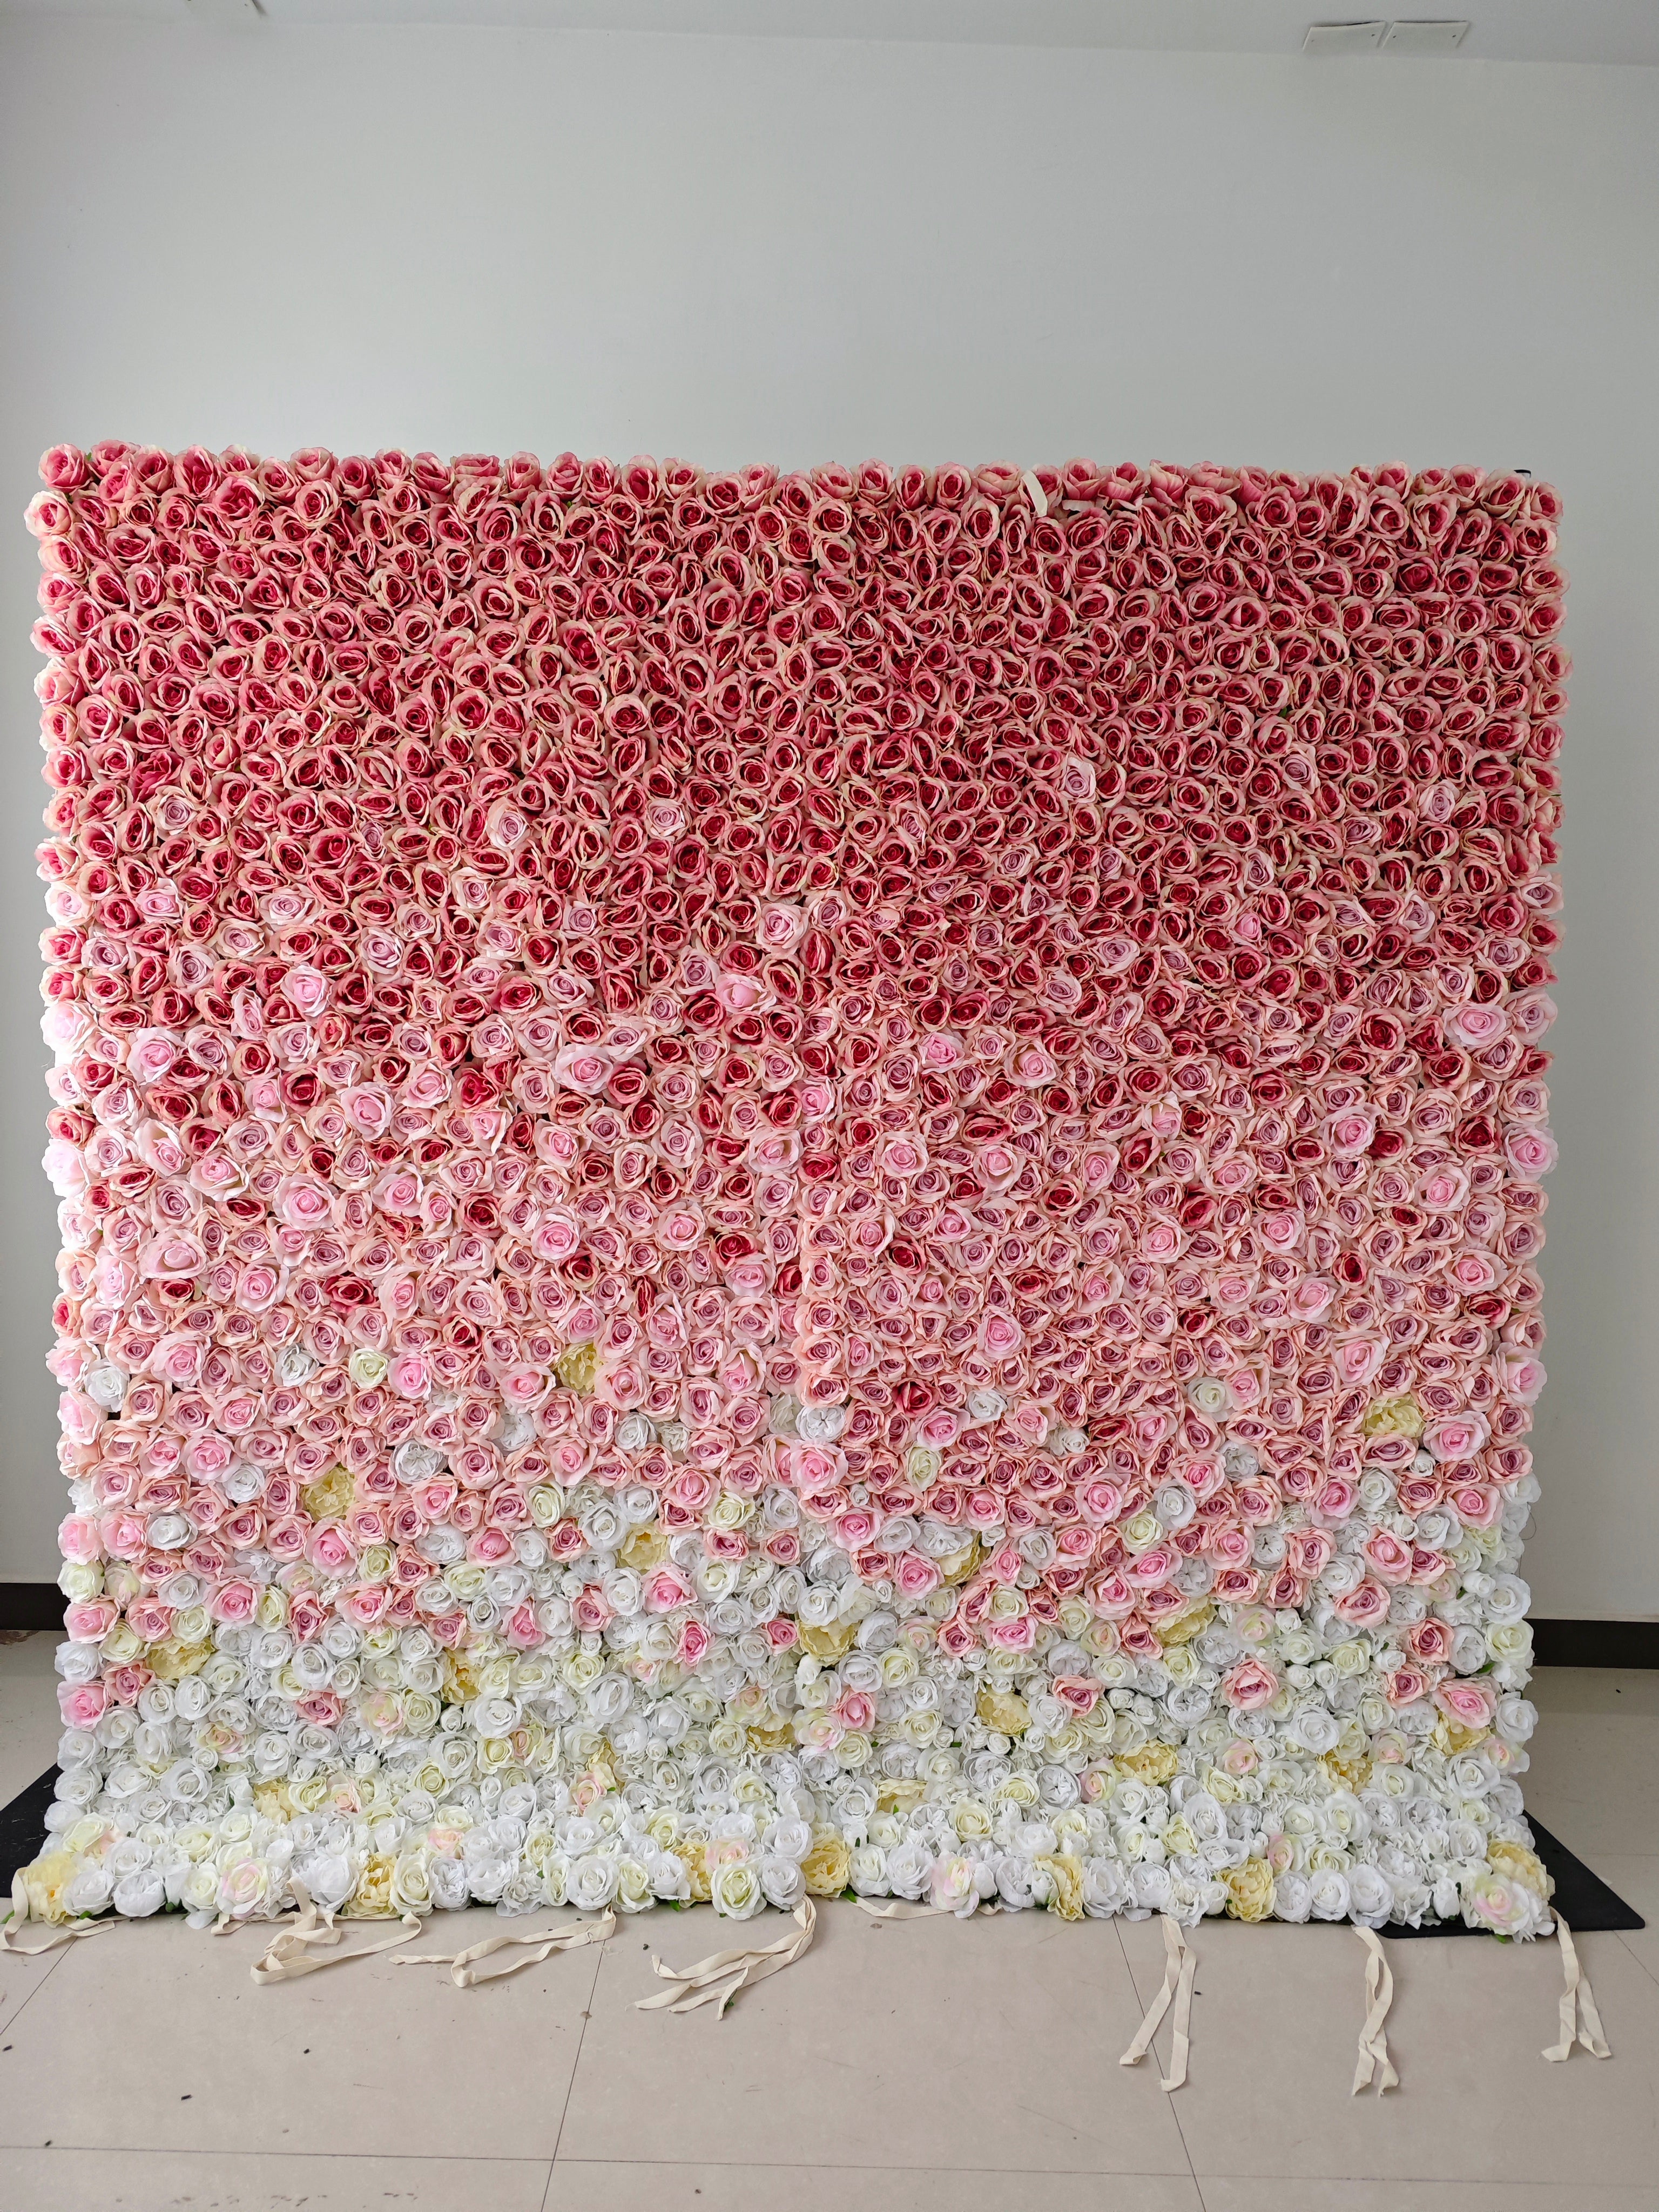 Flower Wall 3D Gradient Pink White Fabric Rolling Up Curtain Floral Backdrop Wedding Party Proposal Decor